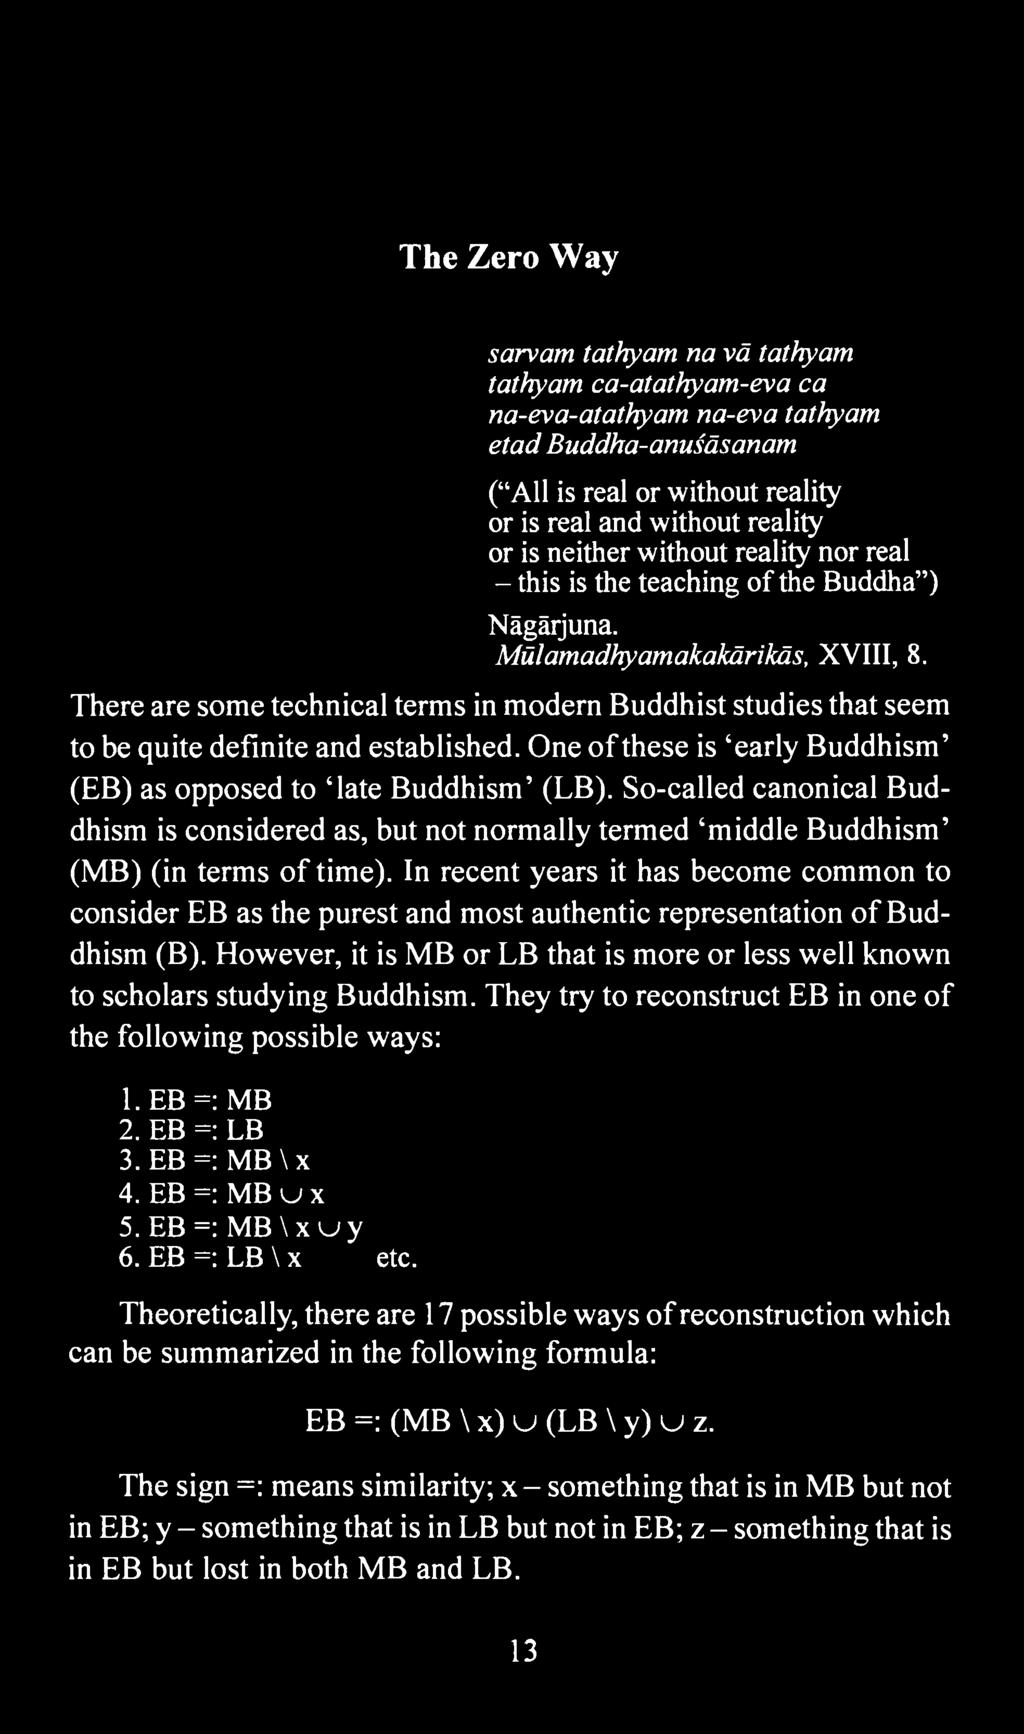 In recent years it has become common to consider EB as the purest and most authentic representation of Buddhism (B).